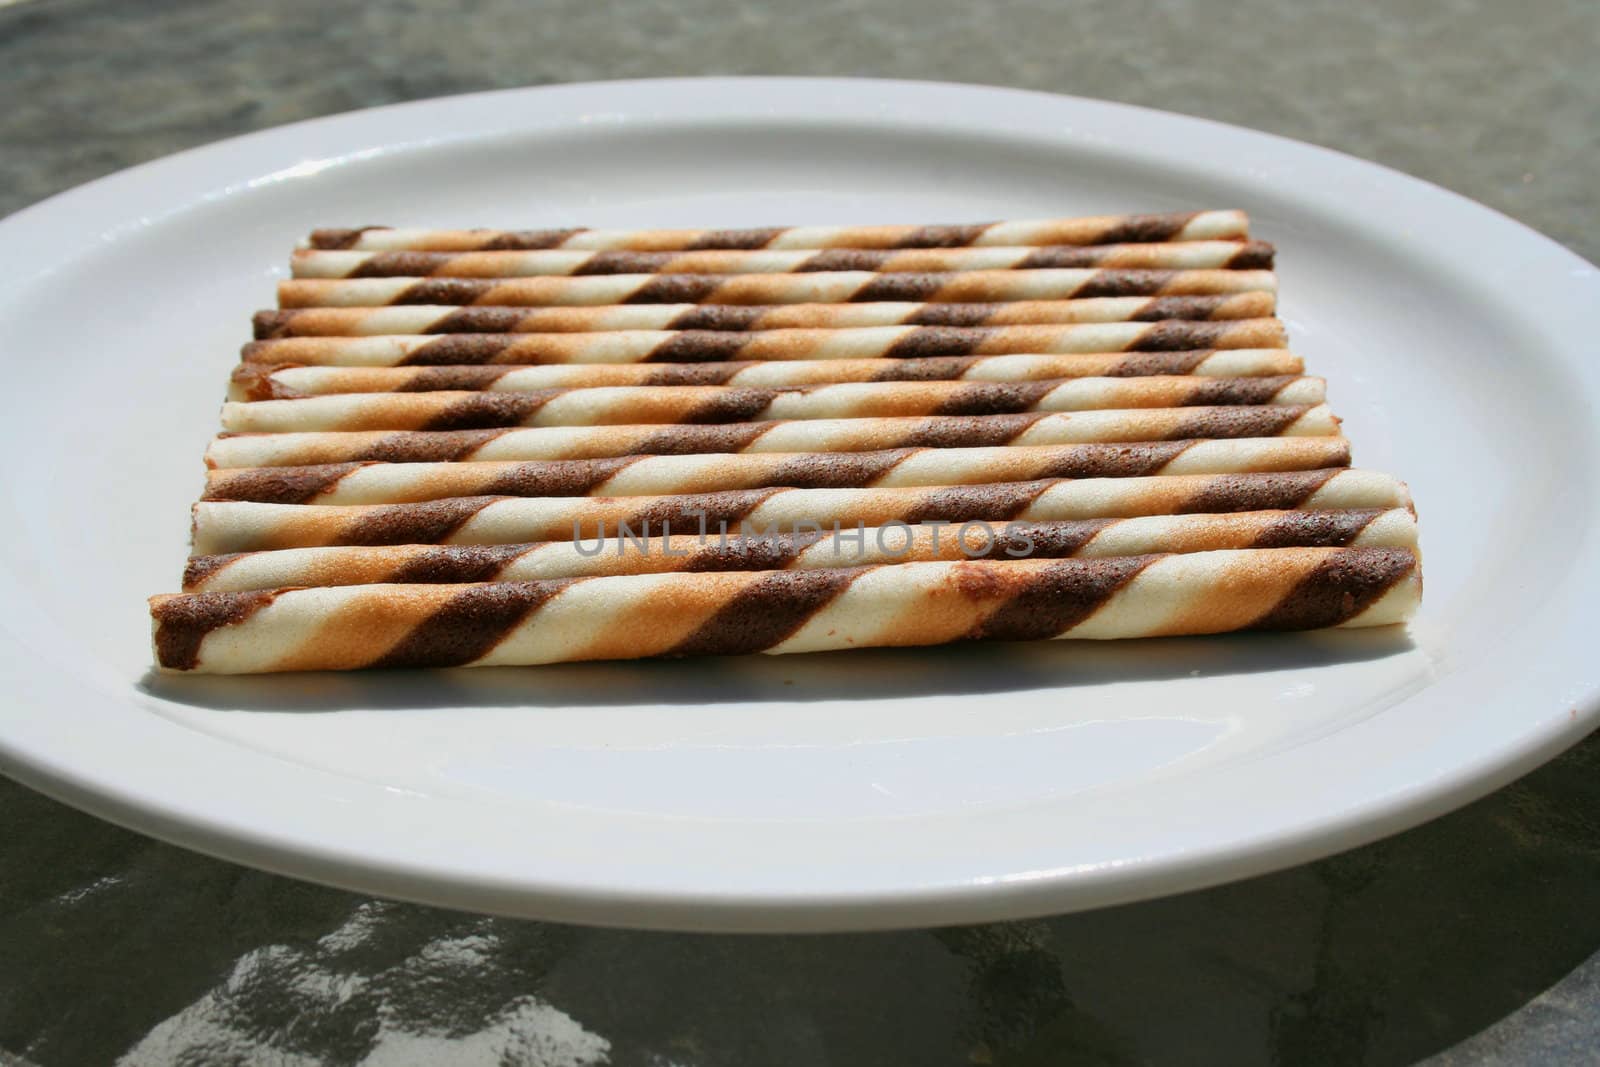 Close up of chocolate cookie sticks on a plate.
